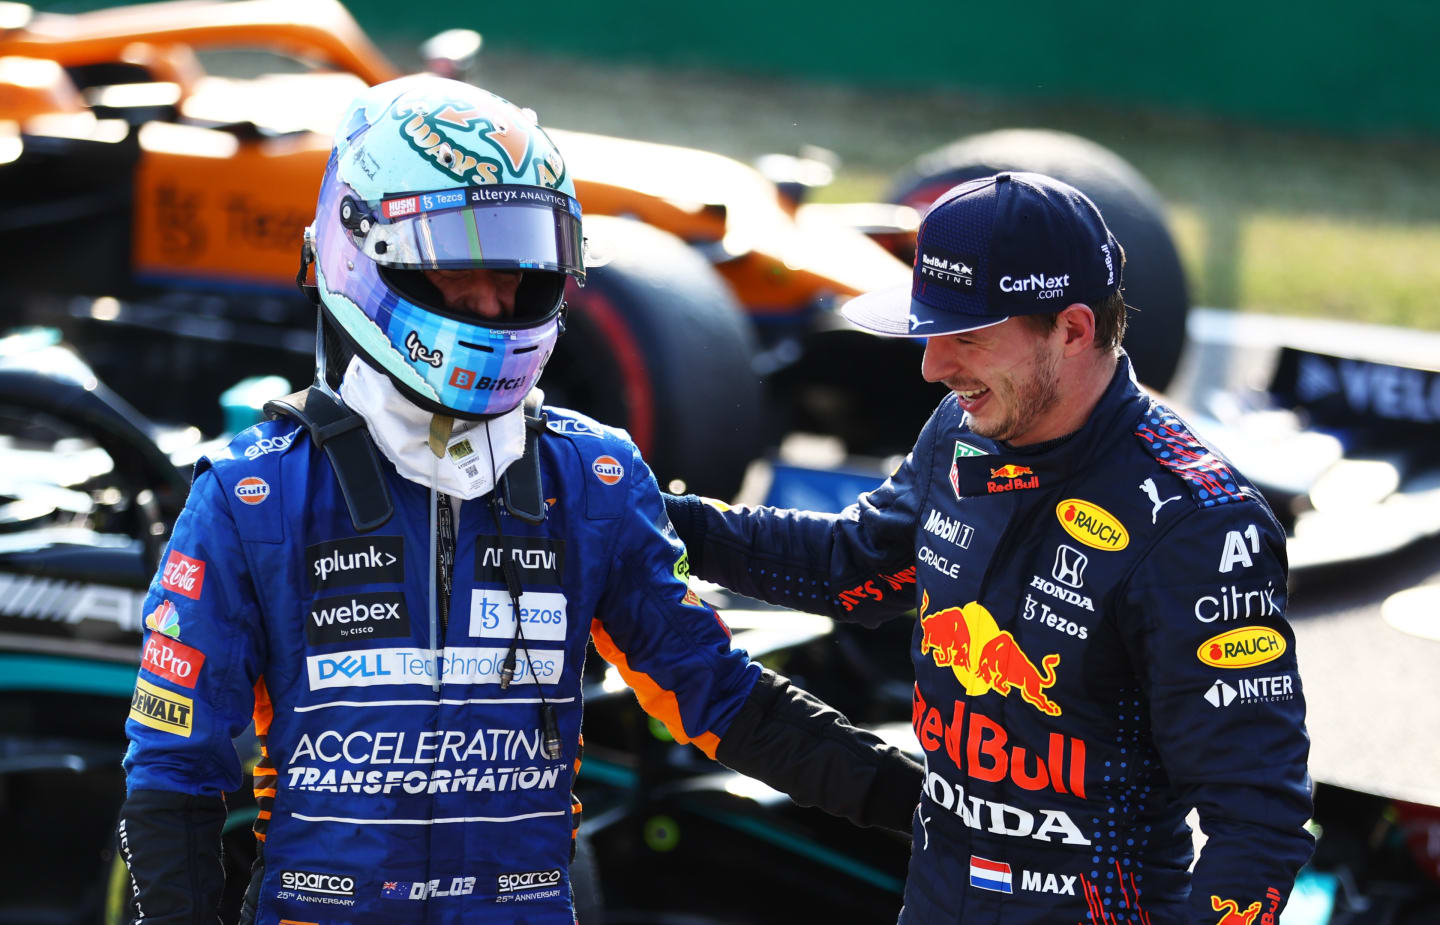 MONZA, ITALY - SEPTEMBER 11: Second place finisher Max Verstappen of Netherlands and Red Bull Racing talks with third place finisher Daniel Ricciardo of Australia and McLaren F1 in parc ferme during the Sprint ahead of the F1 Grand Prix of Italy at Autodromo di Monza on September 11, 2021 in Monza, Italy. (Photo by Bryn Lennon/Getty Images)